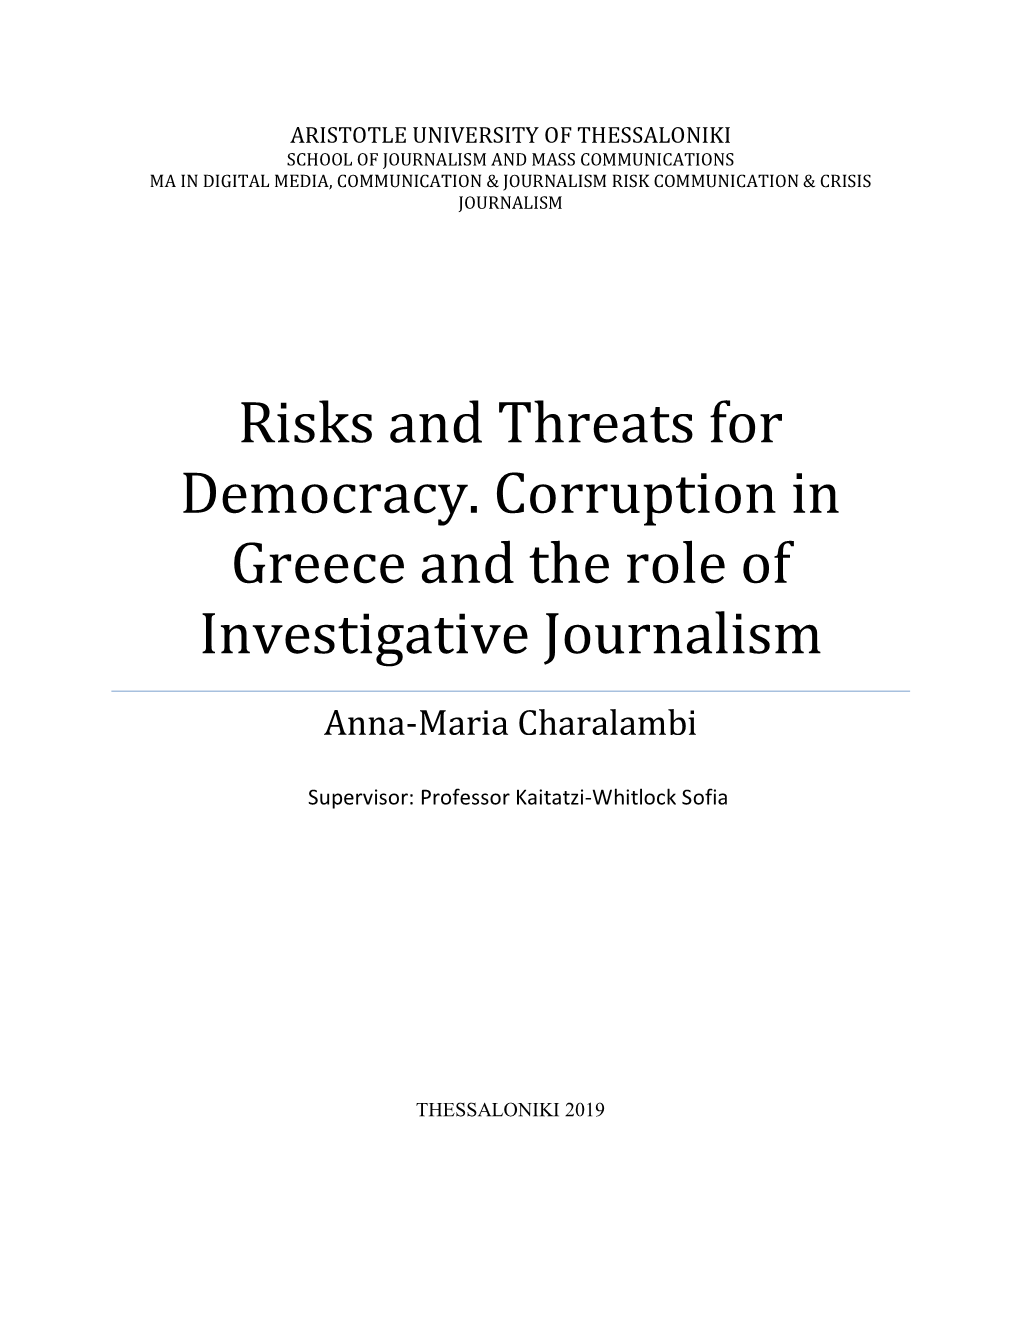 Risks and Threats for Democracy. Corruption in Greece and the Role of Investigative Journalism